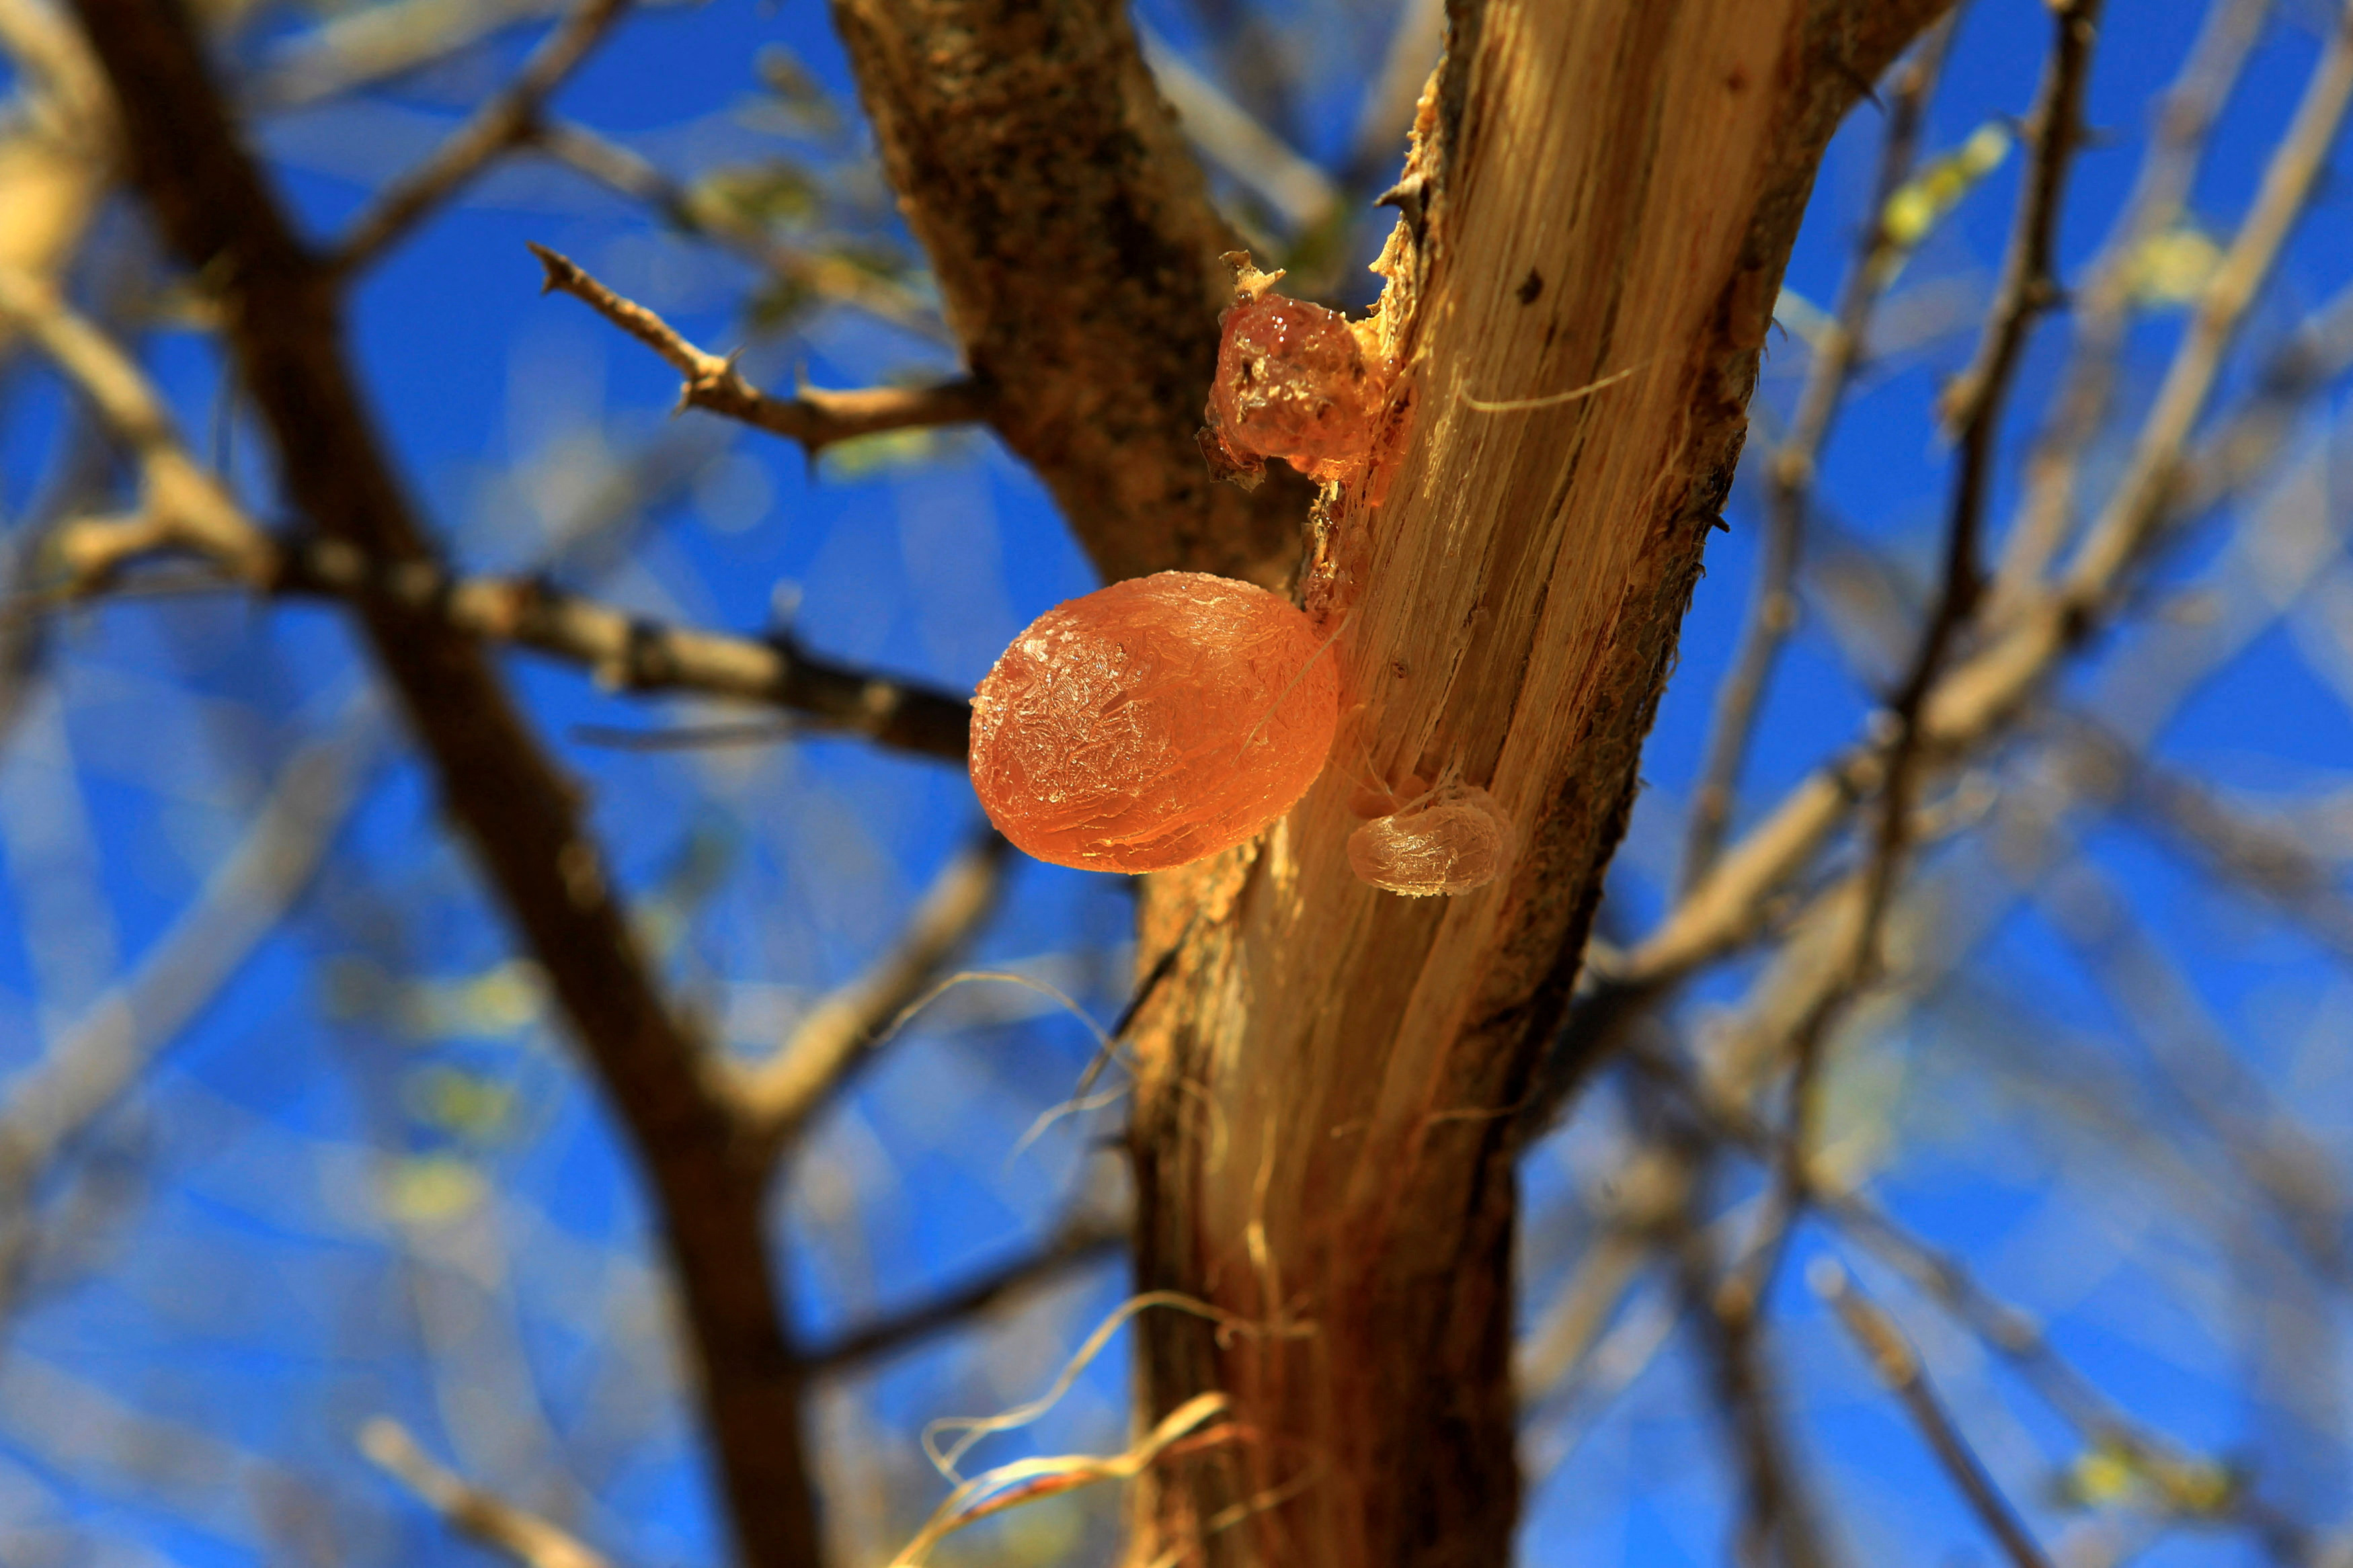 Gum arabic is seen on an Acacia trees in the western Sudanese town of El-Nahud